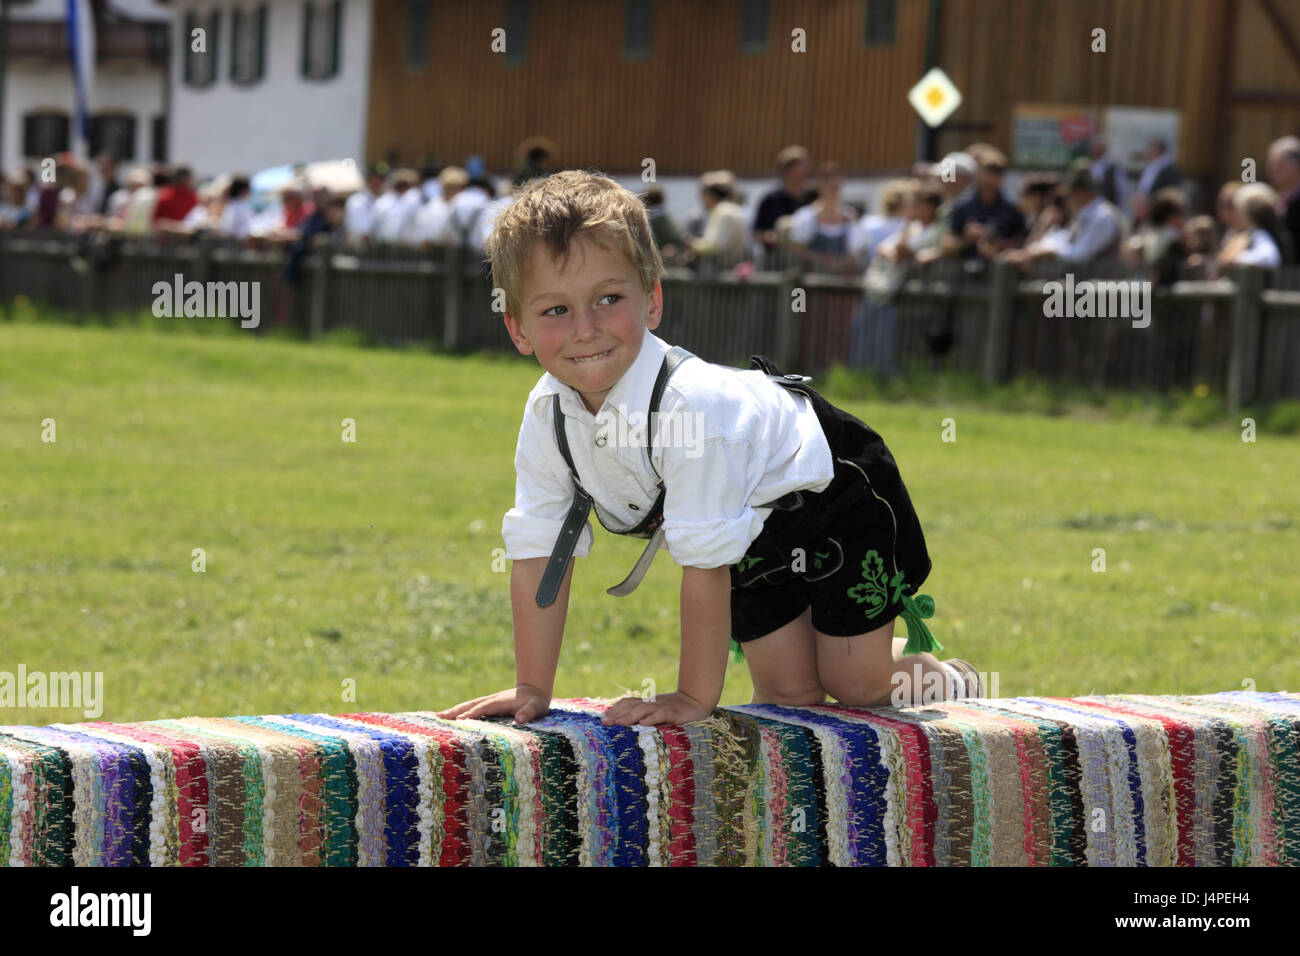 Germany, Bavaria, Upper Bavaria, priest's angle, village Ant, May running, defensive wall, boy, leather ball trousers, tickle, no model release, Stock Photo